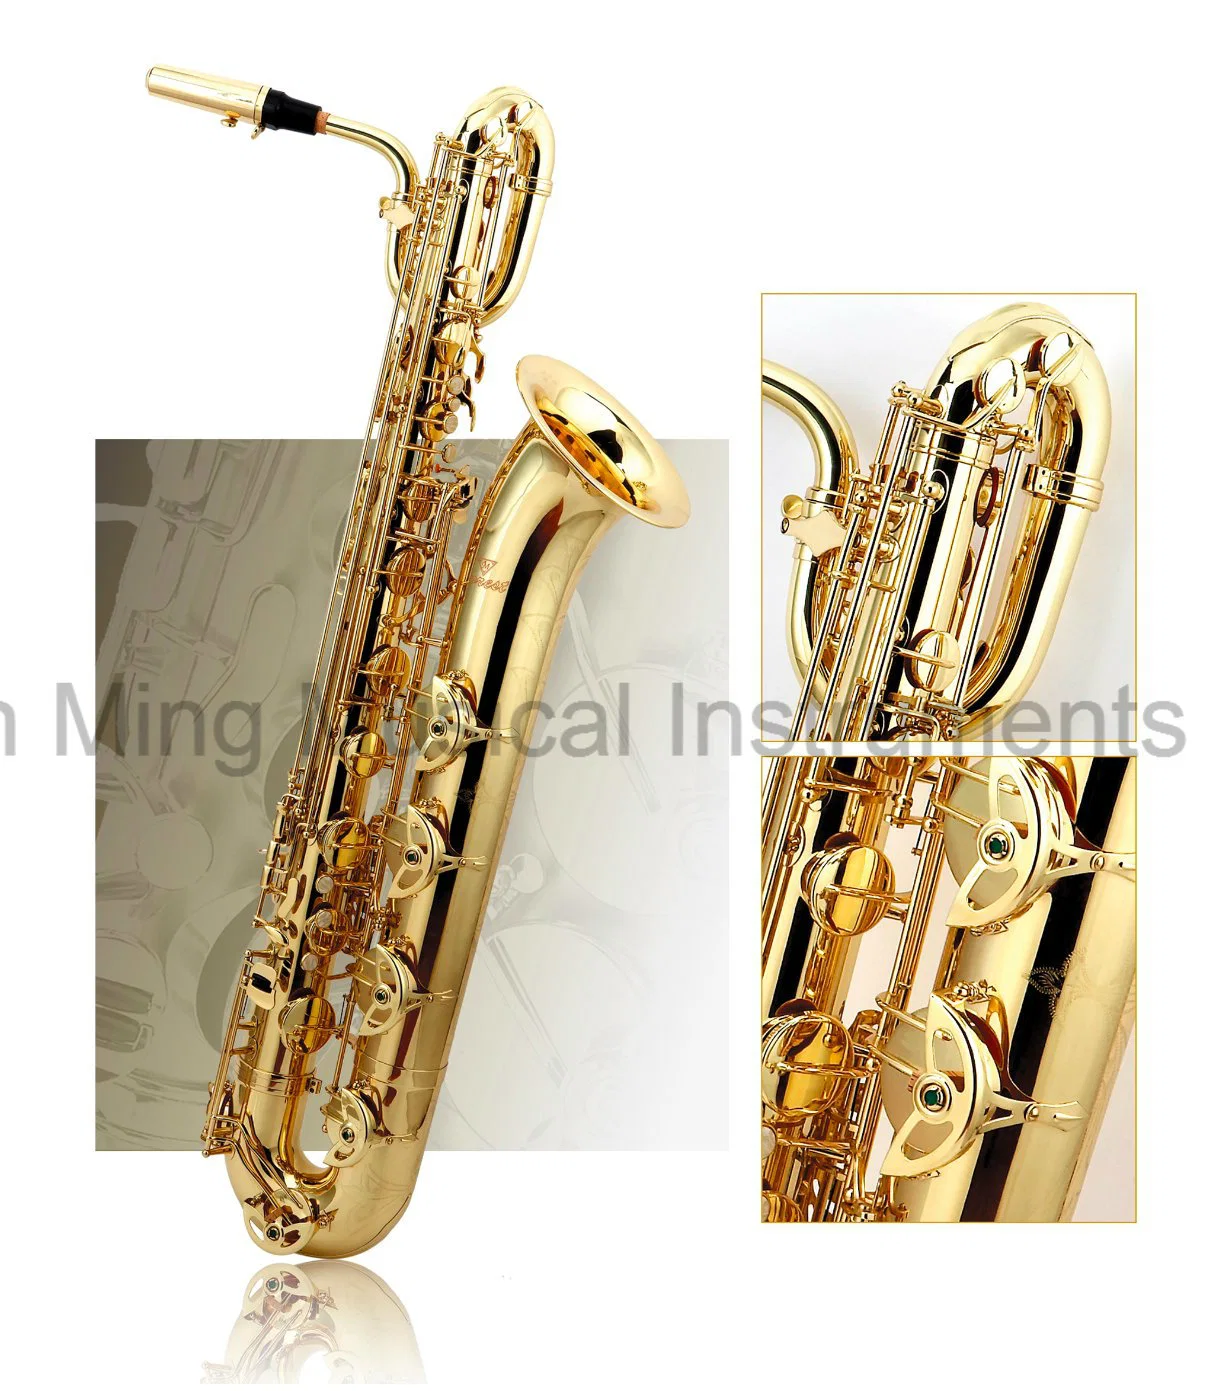 Good Baritone Saxophone Brass Body Gold Lacquer/Black Nickel Finish for Choice